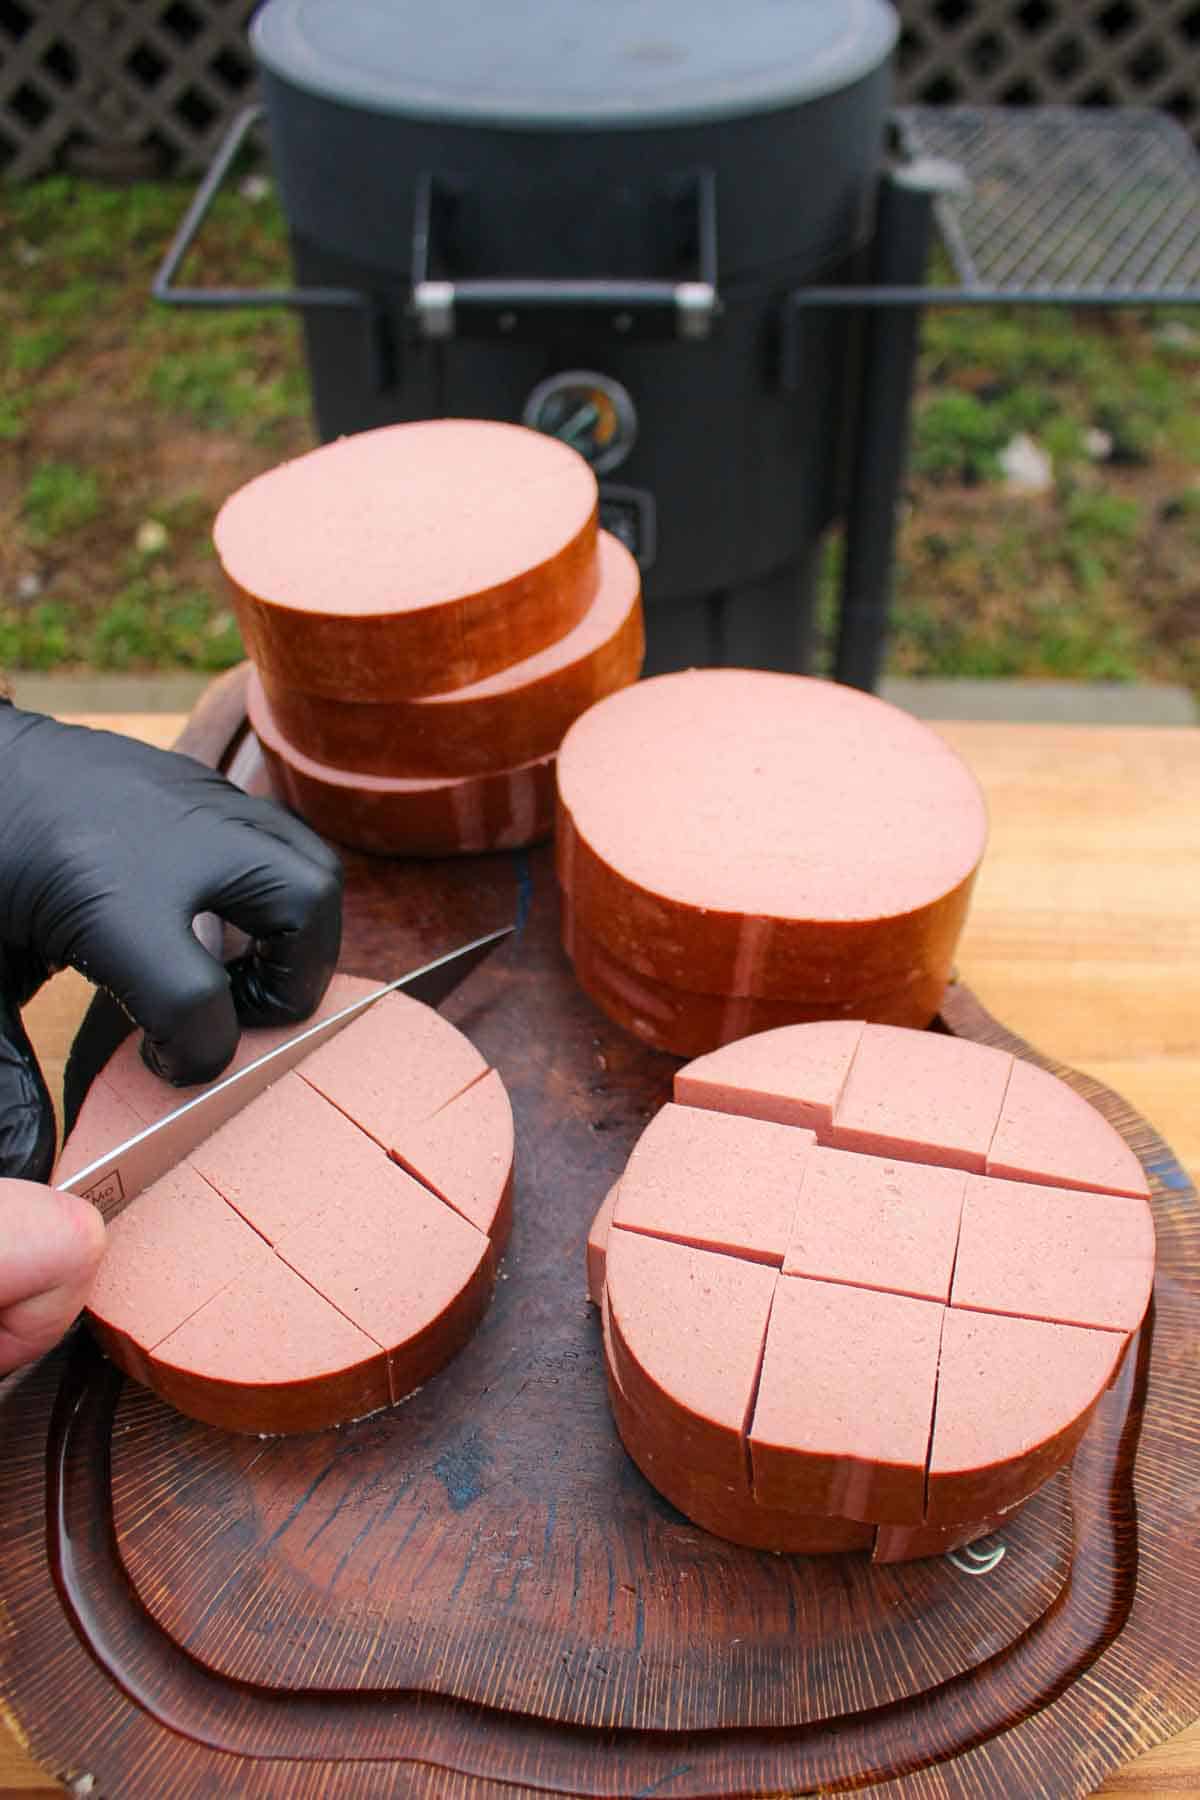 Slicing and prepping the unseasoned bologna.